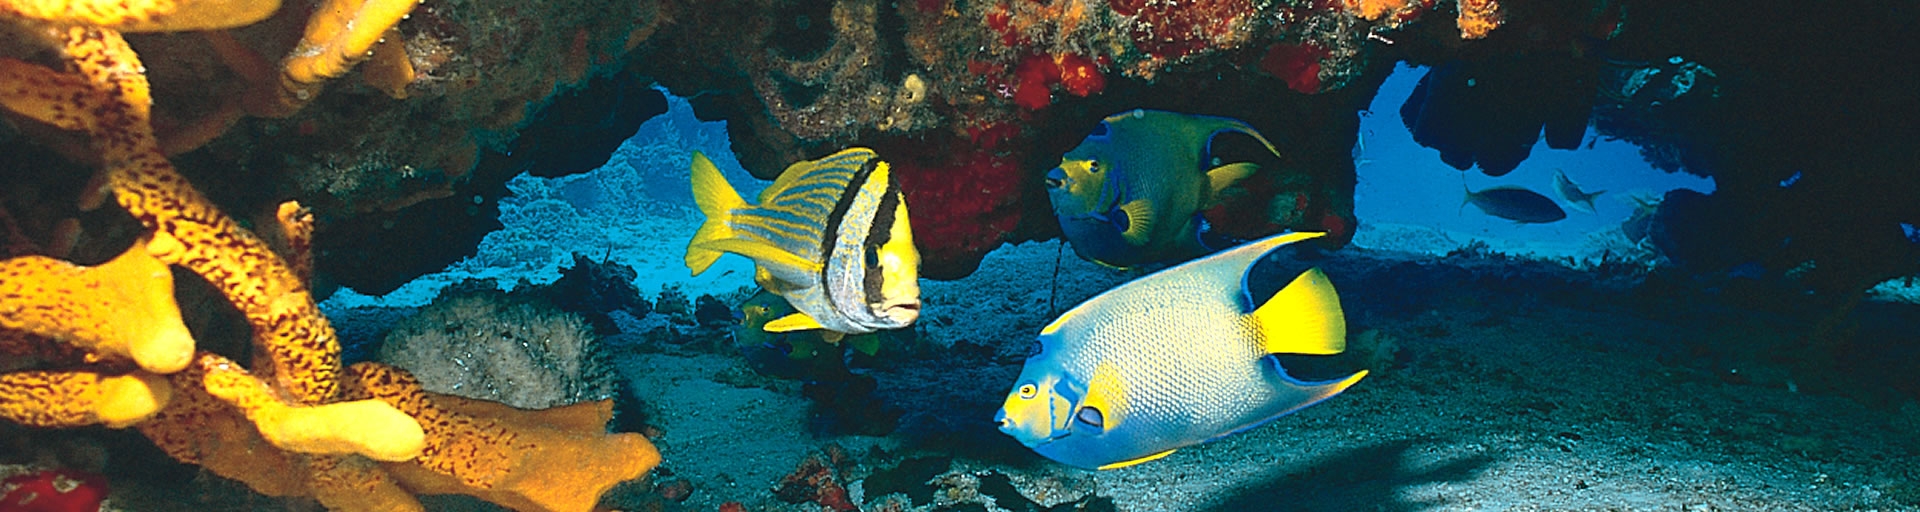 tropical fish in the Belize reef